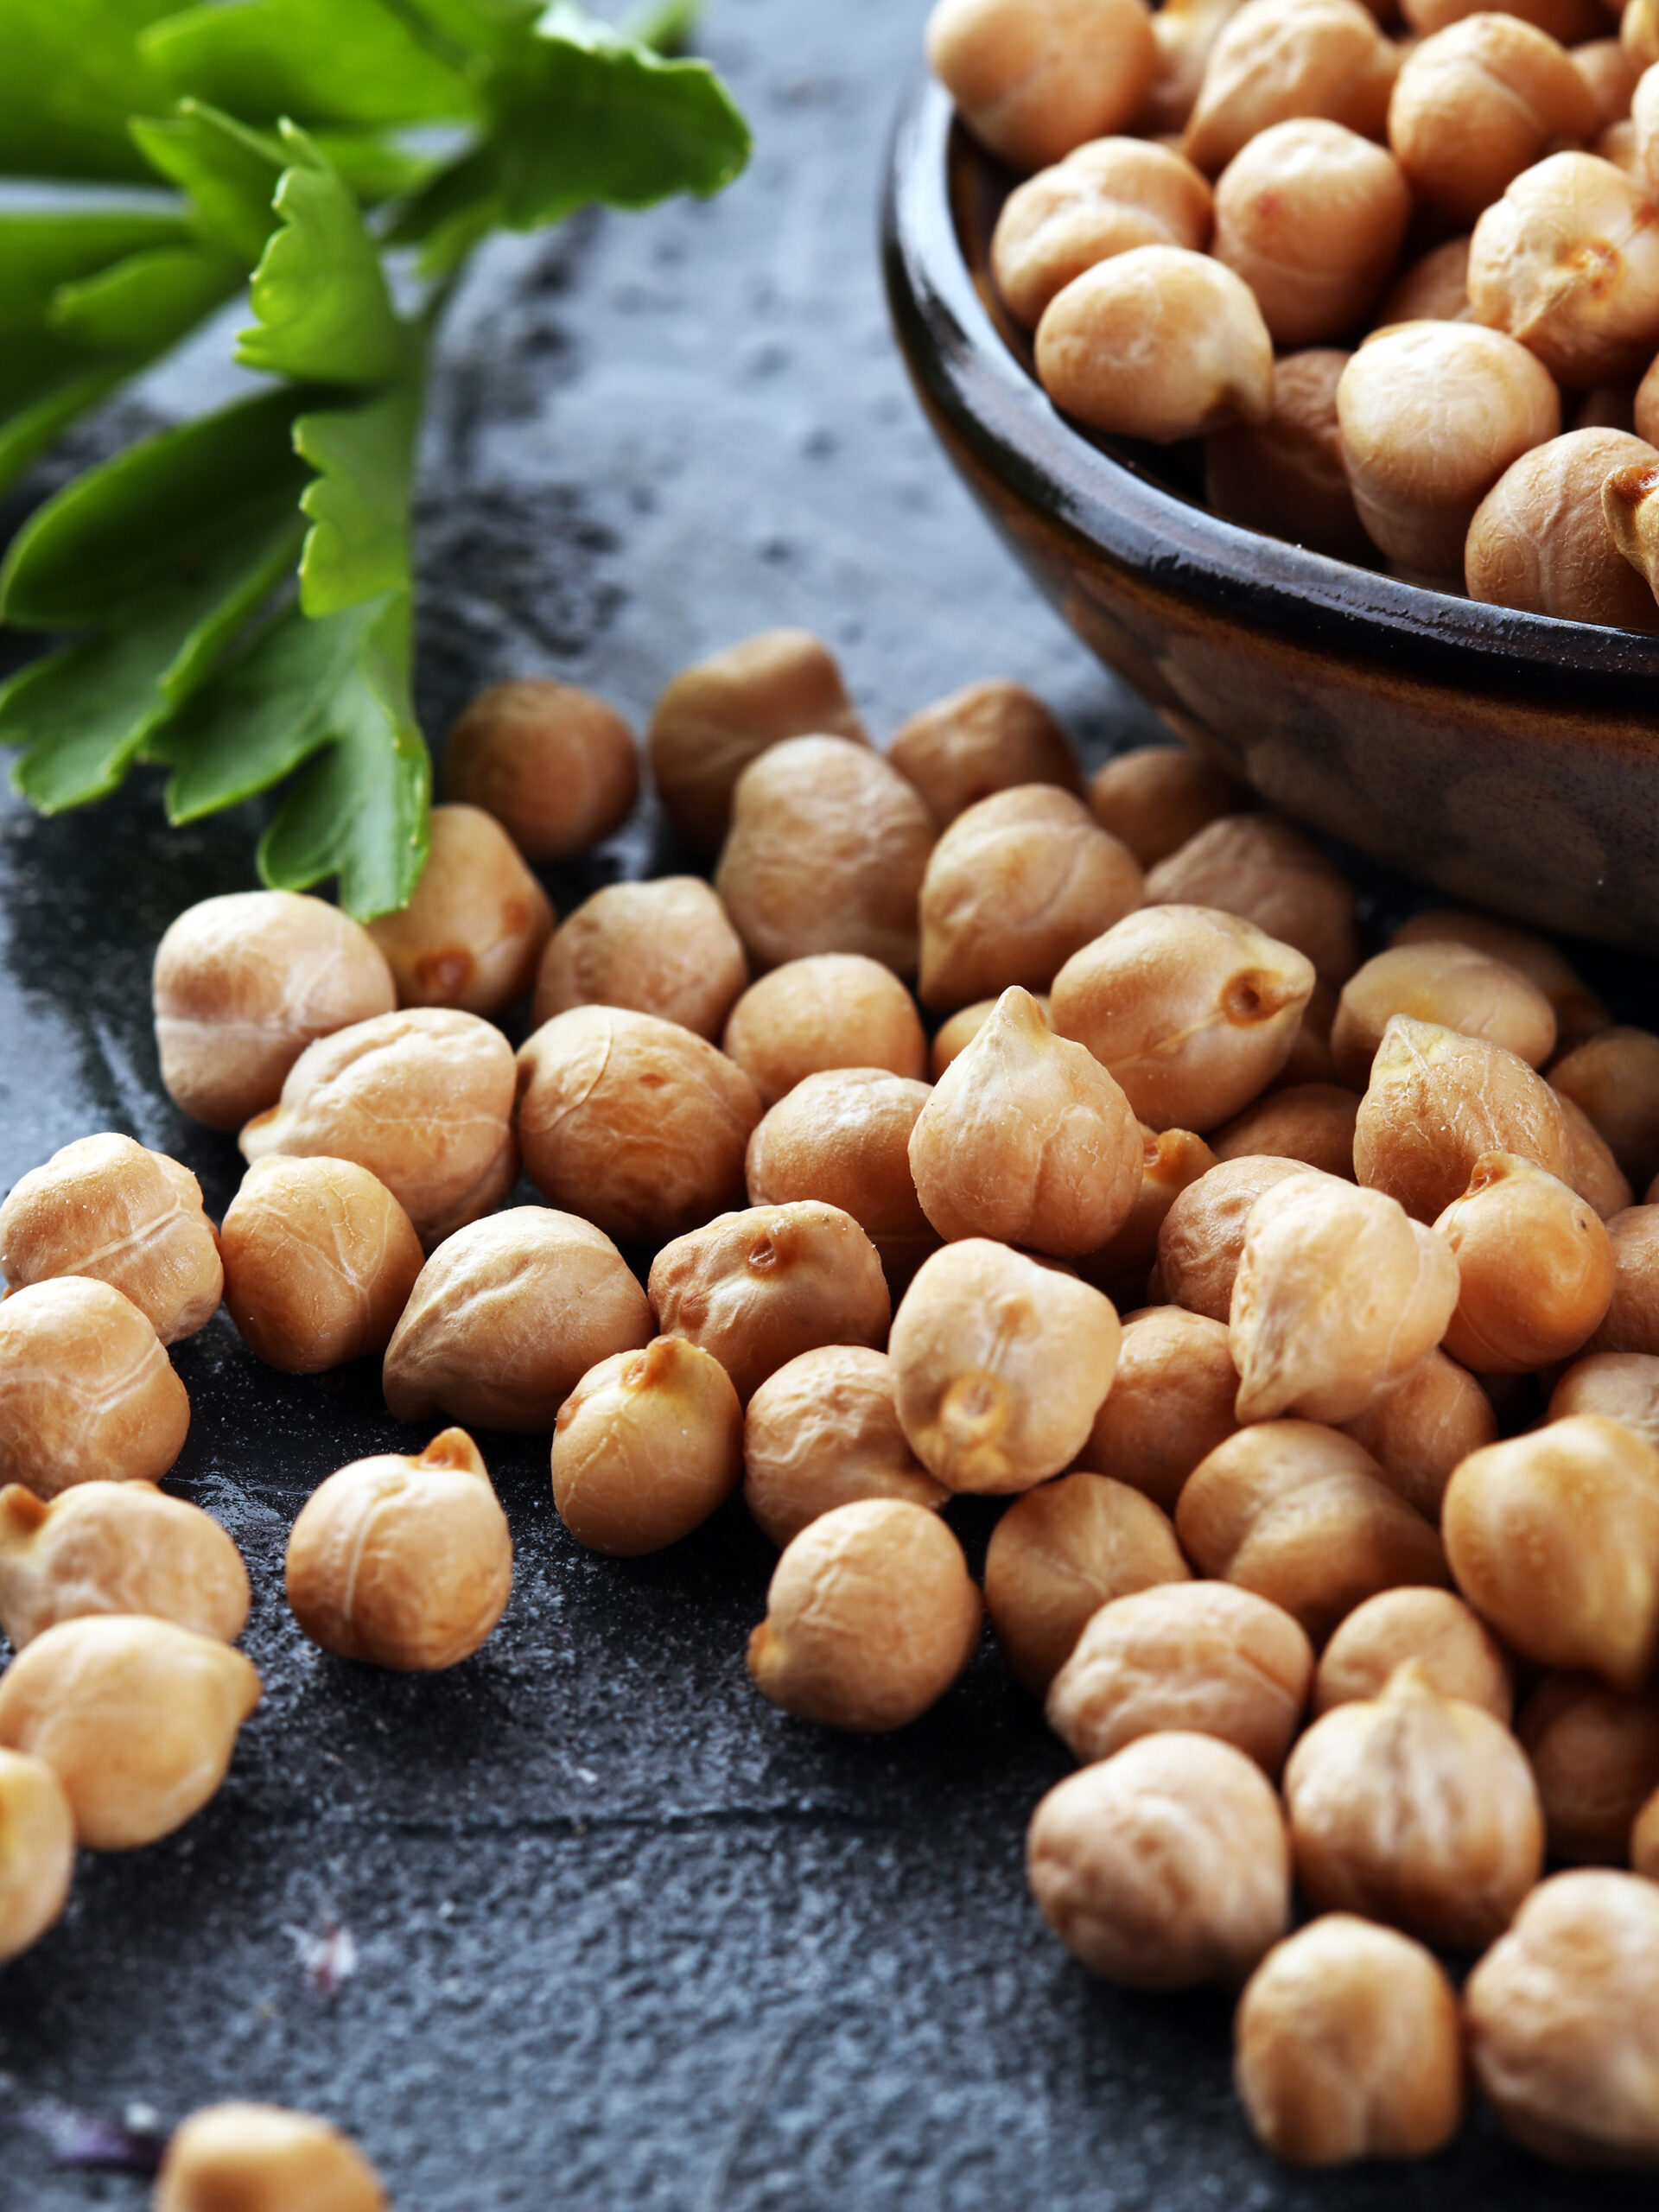 Raw chickpeas on black table - the benefits of adding chickpeas to your child's diet